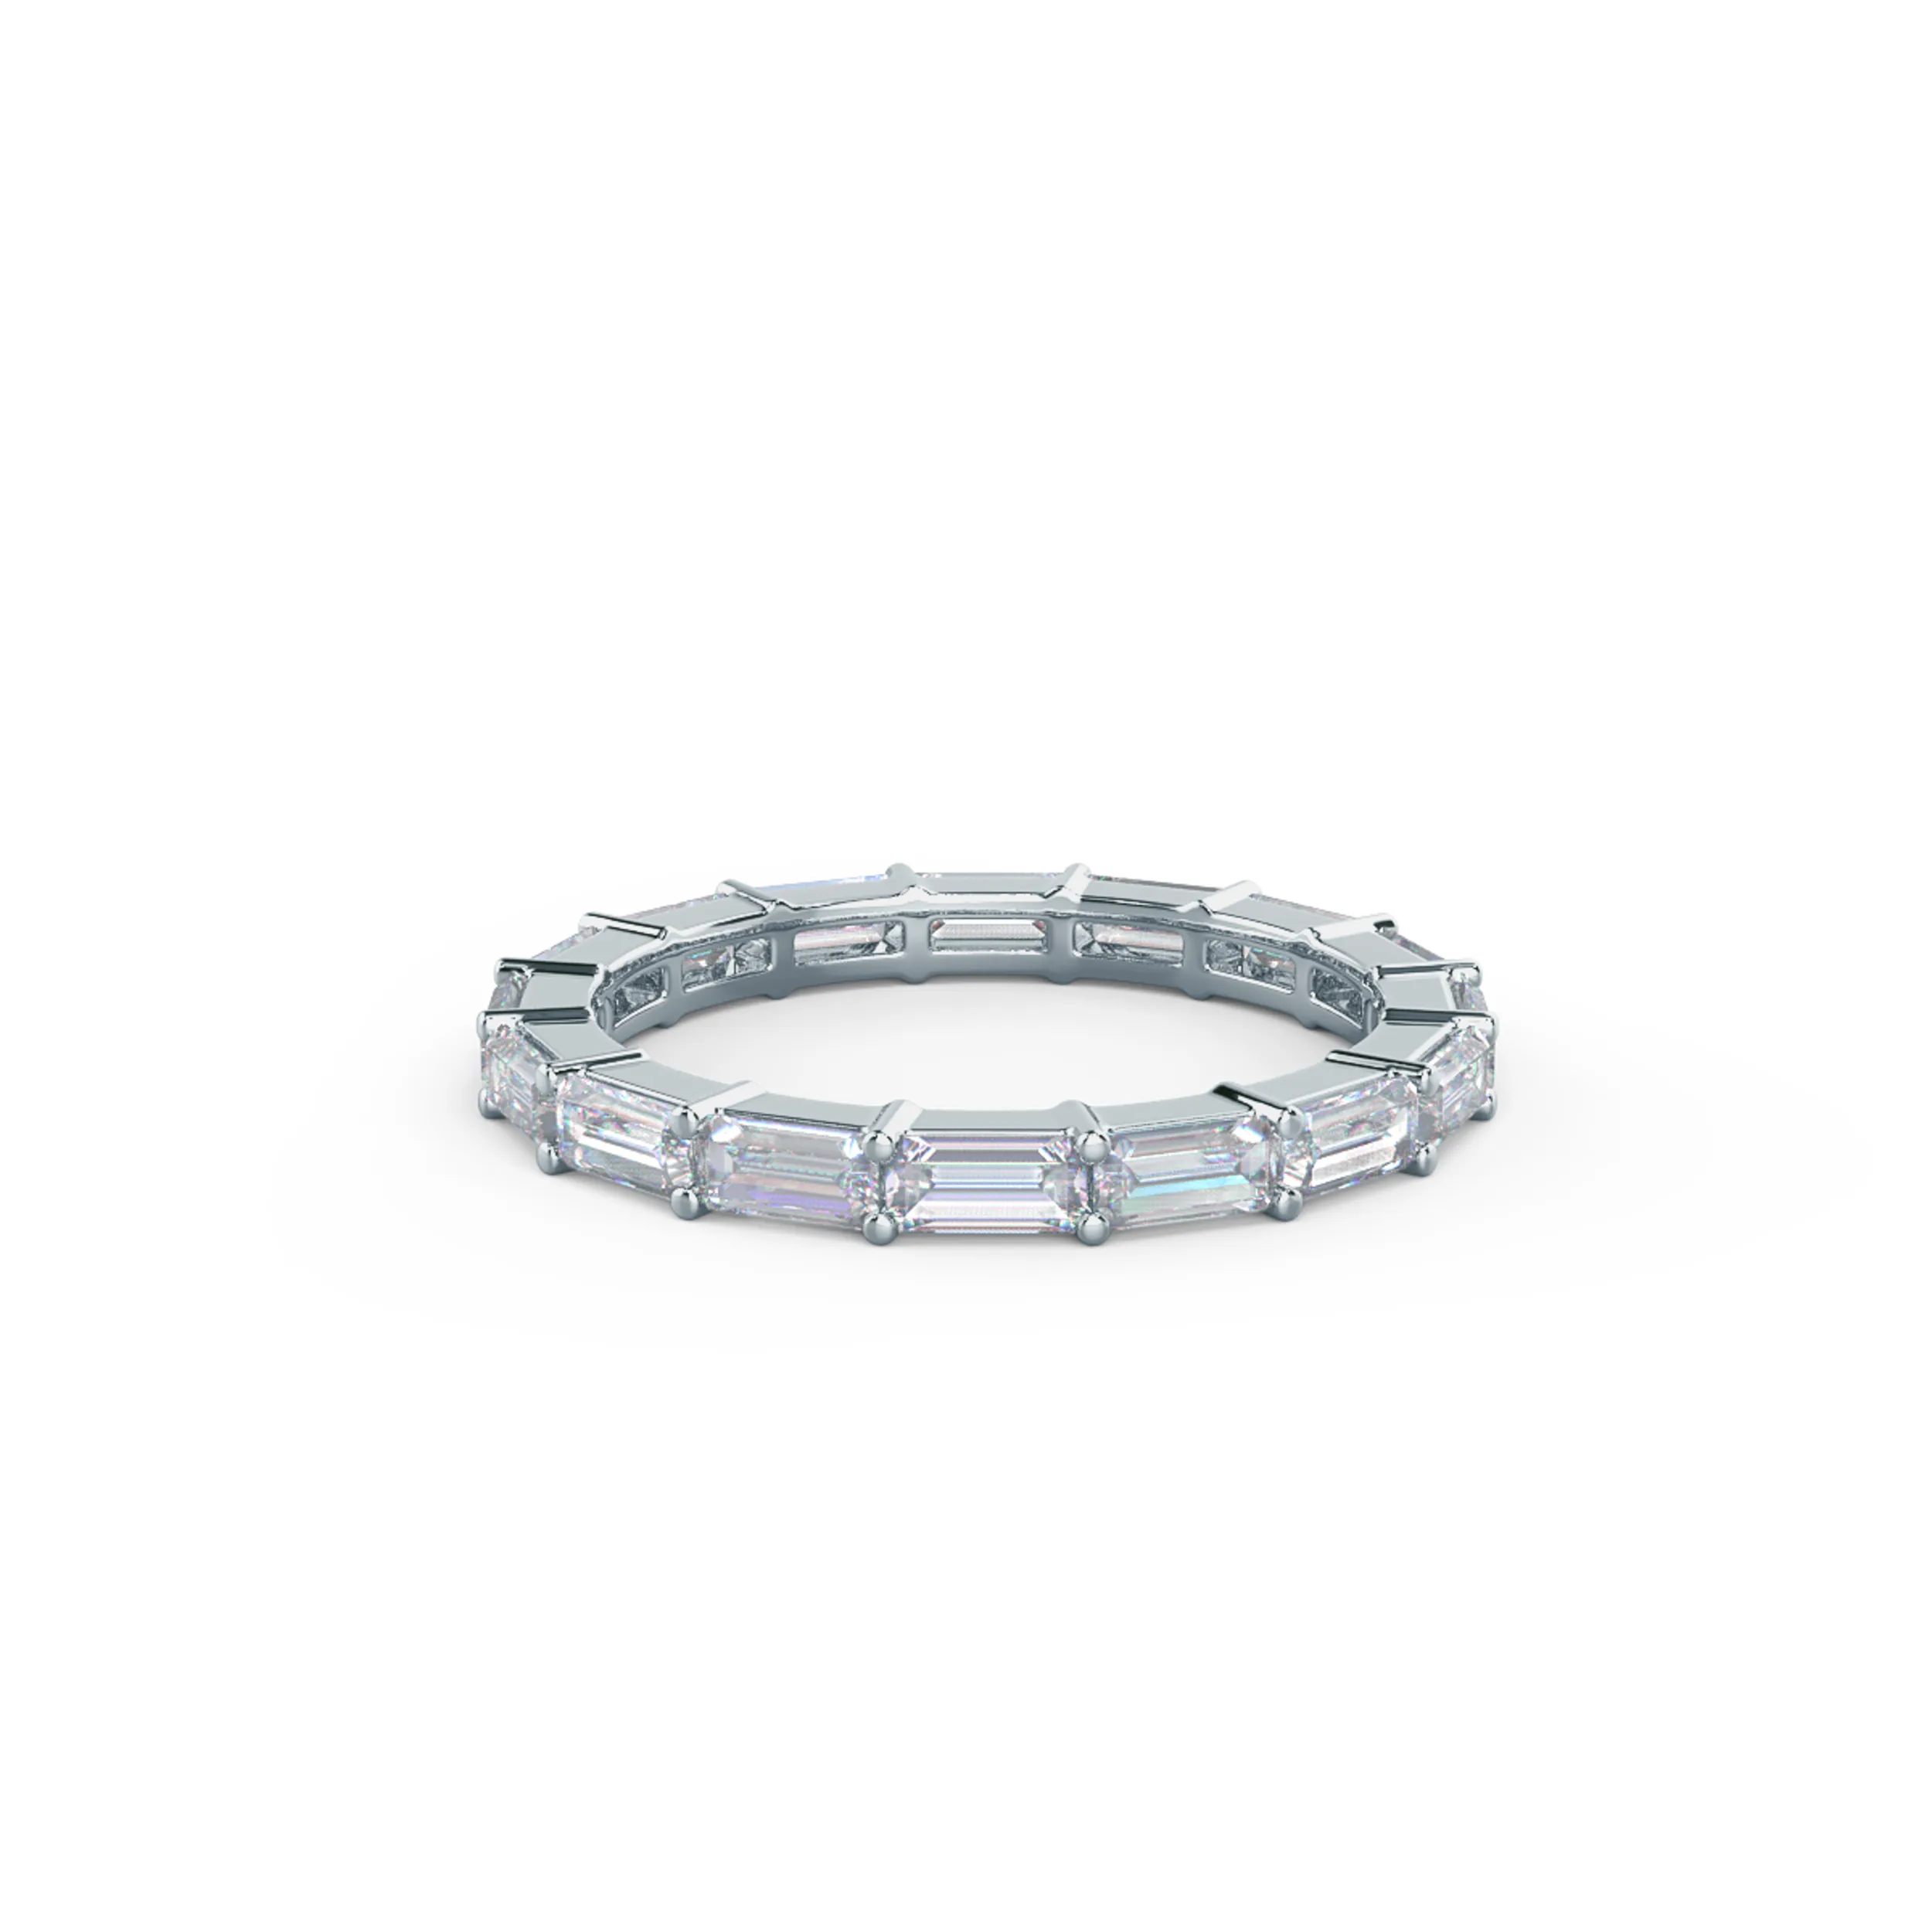 18k White Gold Baguette East-West Eternity Band featuring 1.5 ctw Lab Diamonds (Main View)